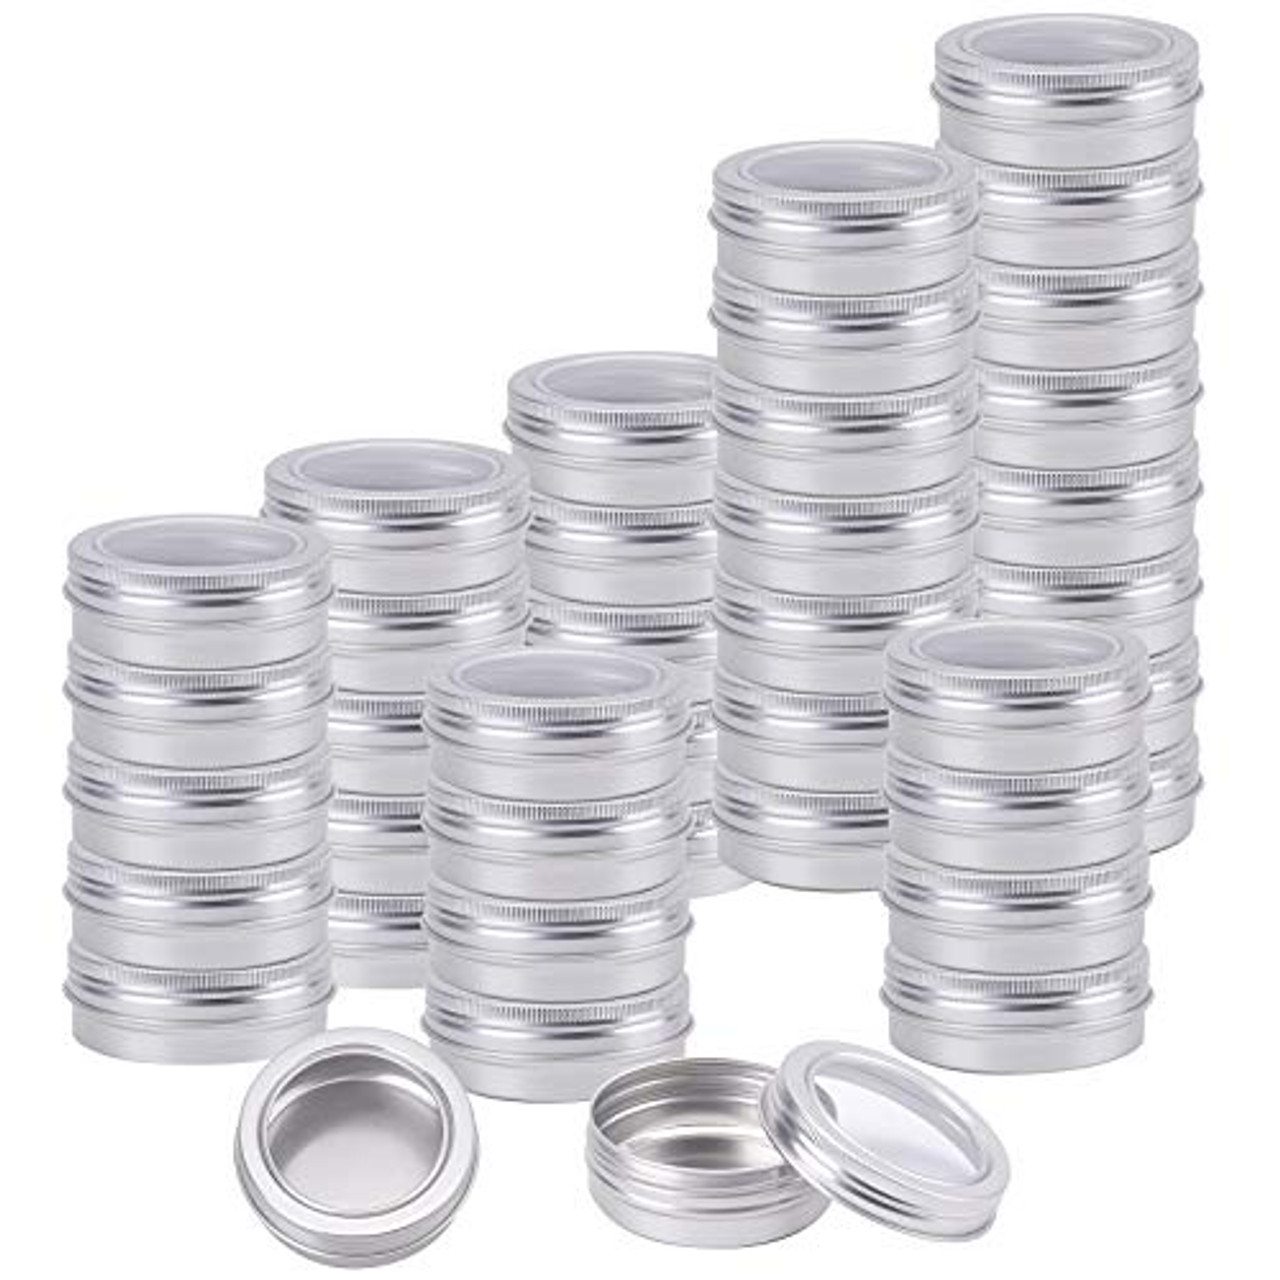 Foraineam 40 Pack 2 Ounce Round Tin Cans Metal Empty Tins Silver Aluminum  Kitchen Office Travel Storage Containers with Clear Screw Top Lids